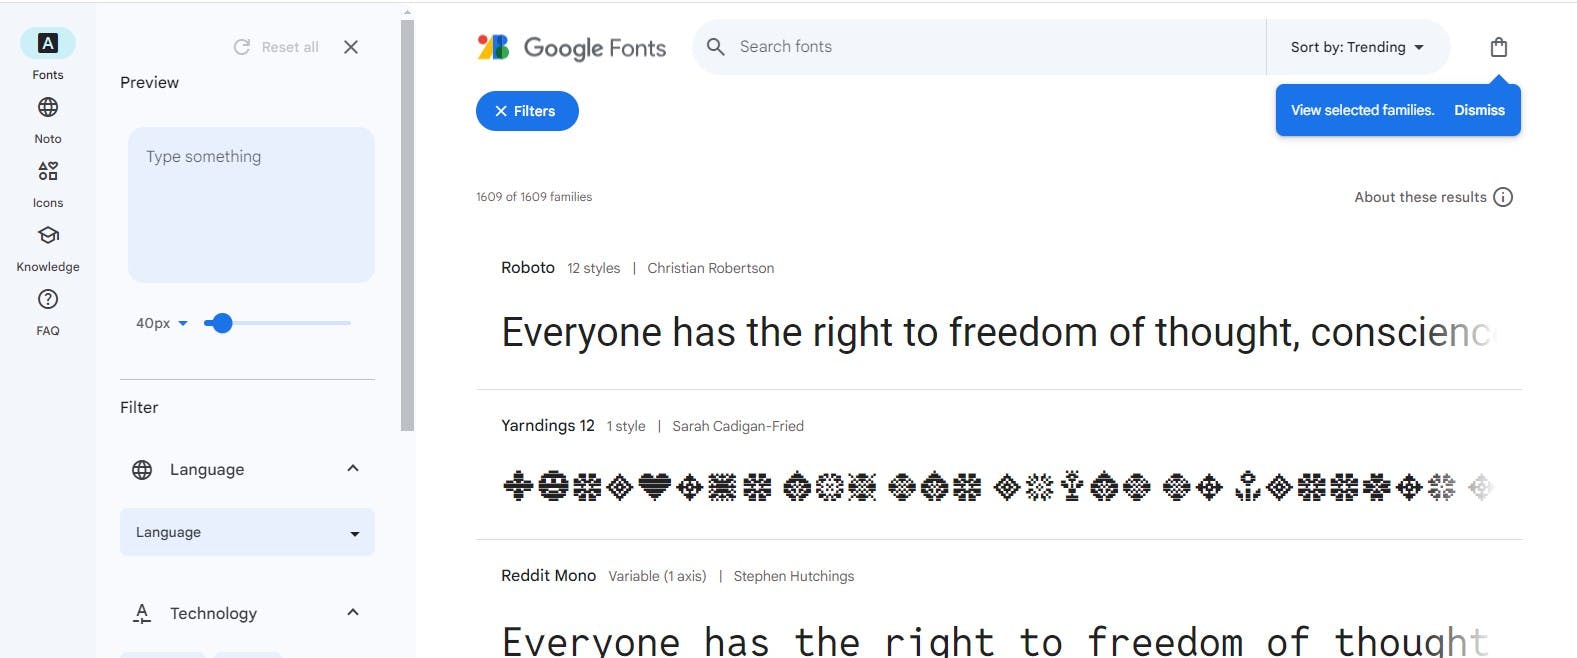 Google Fonts: Worthy resource for typography choices